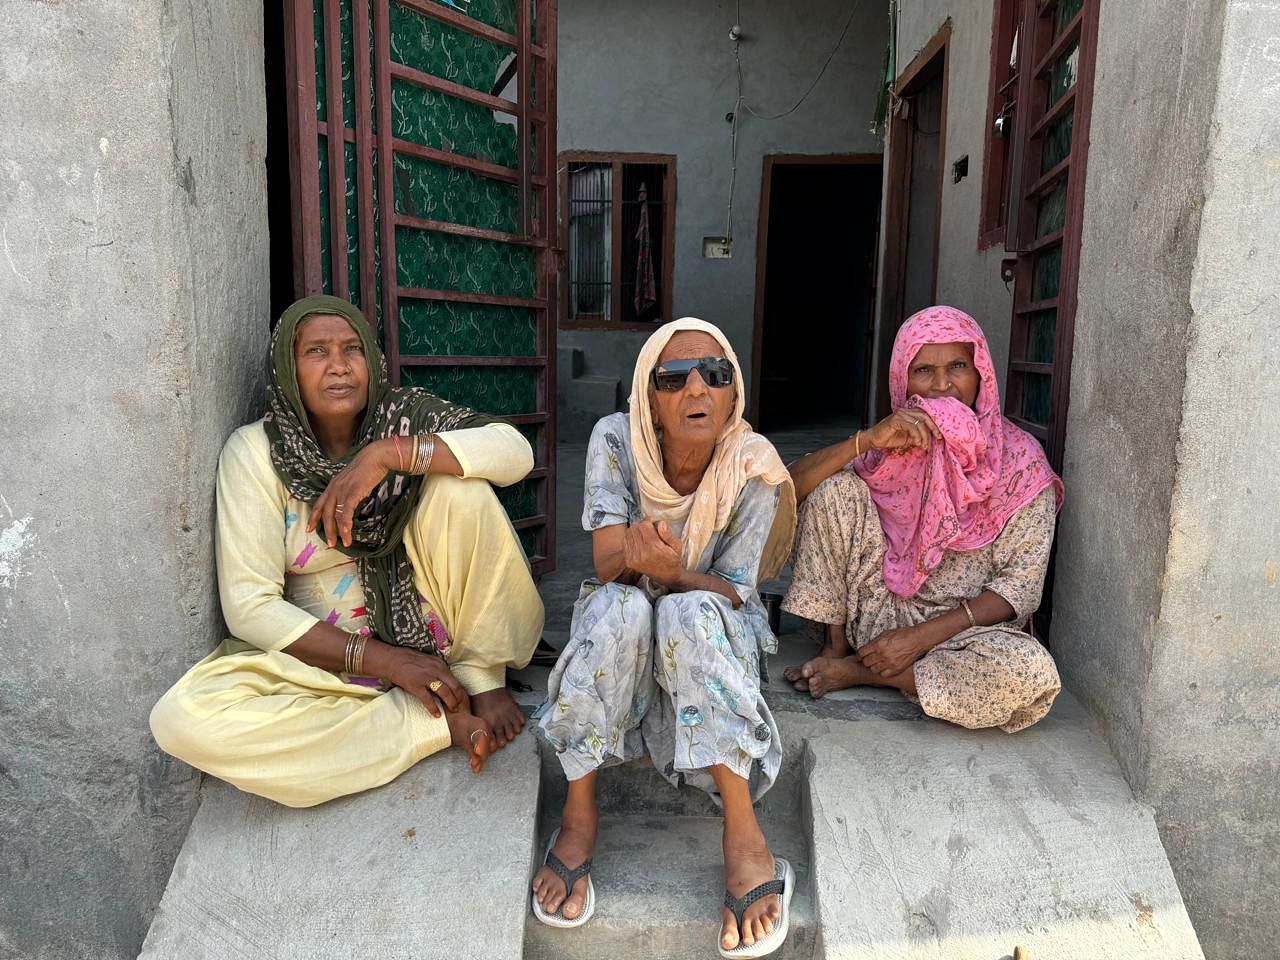 Women discussing the tragic event of Komal's killing and lamenting her death in Nanak colony of Kaithal.